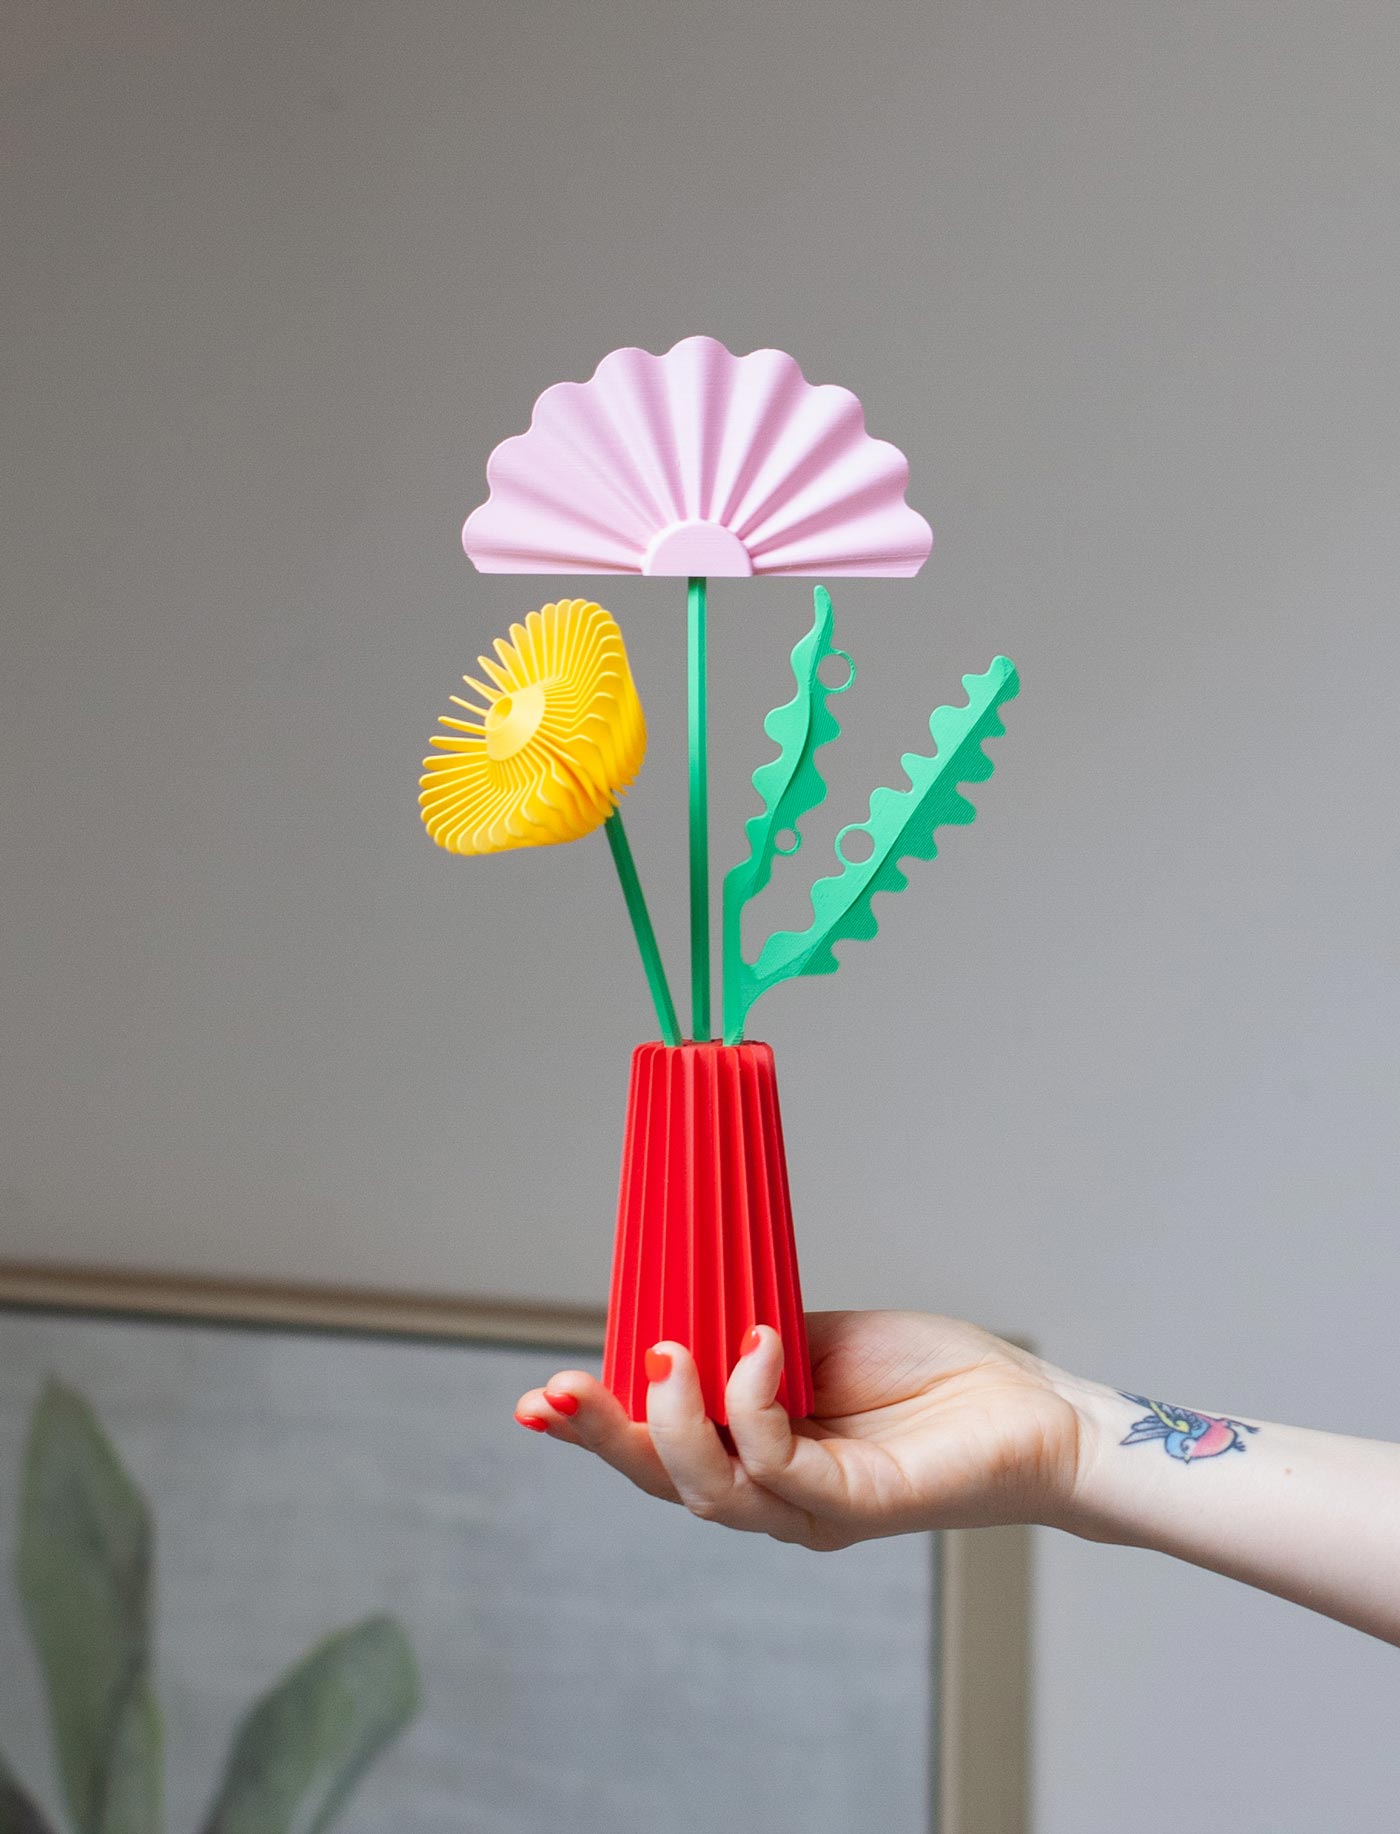 3D printed flower sculpture designed by Wow Mountain. Red base, green fronds, pink fan top and yellow rose flower